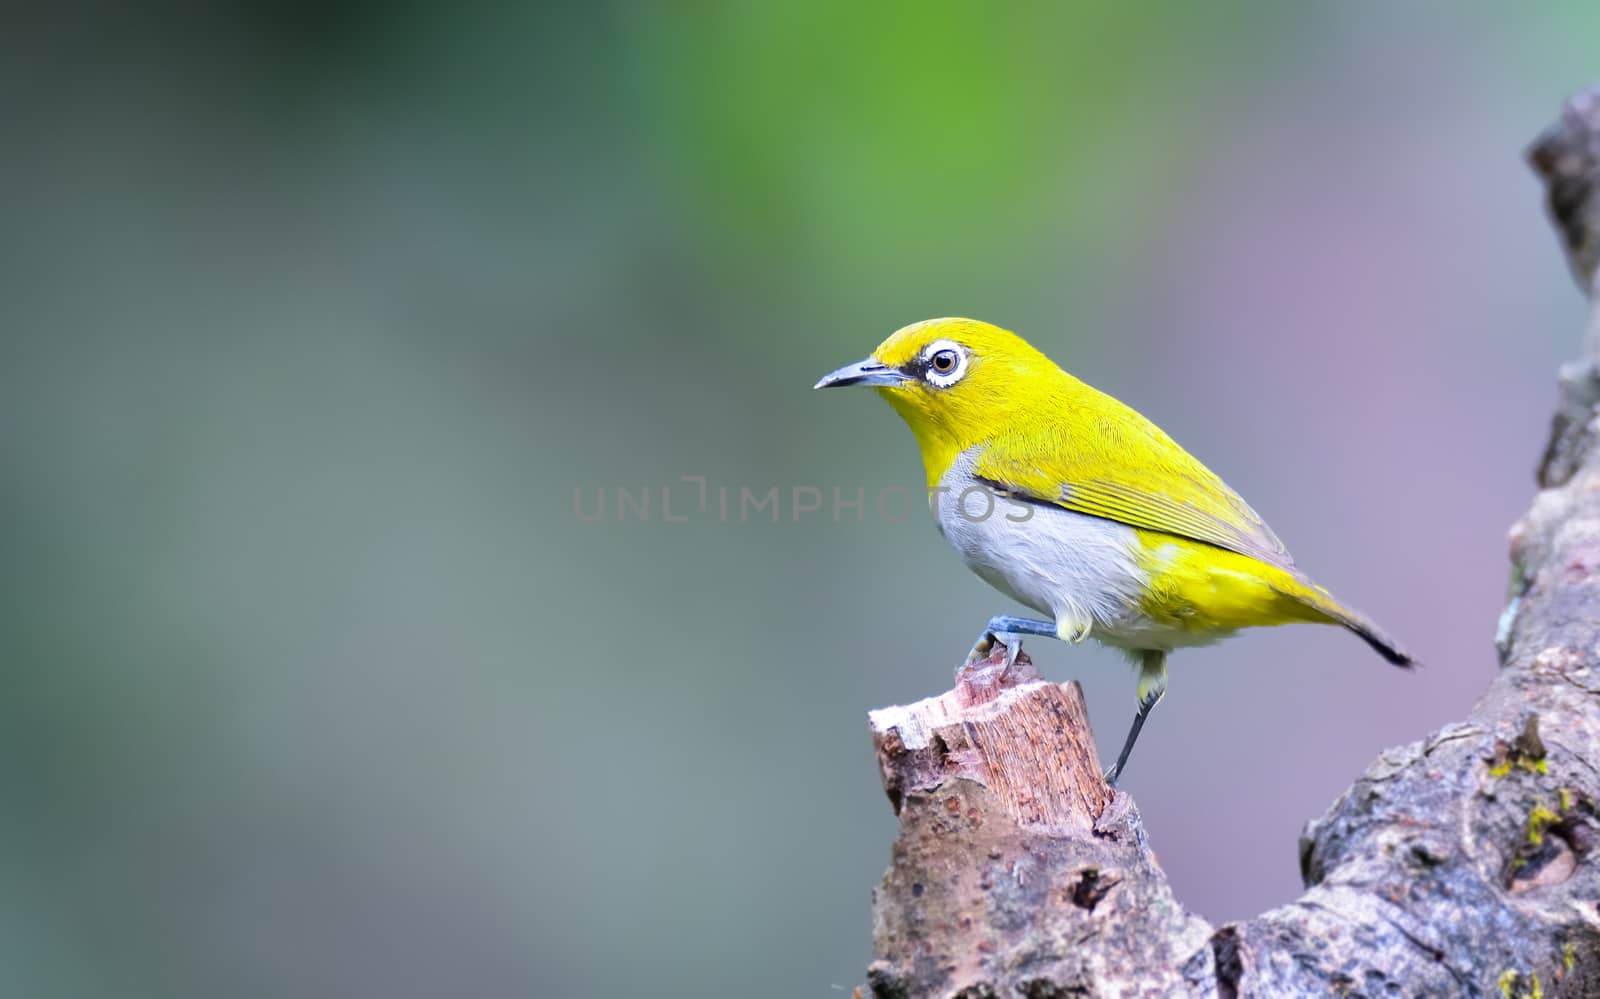 Oriental white-eye: Hyperactive little yellow bird with an off-white belly and white spectacles. Found in a wide range of habitats.